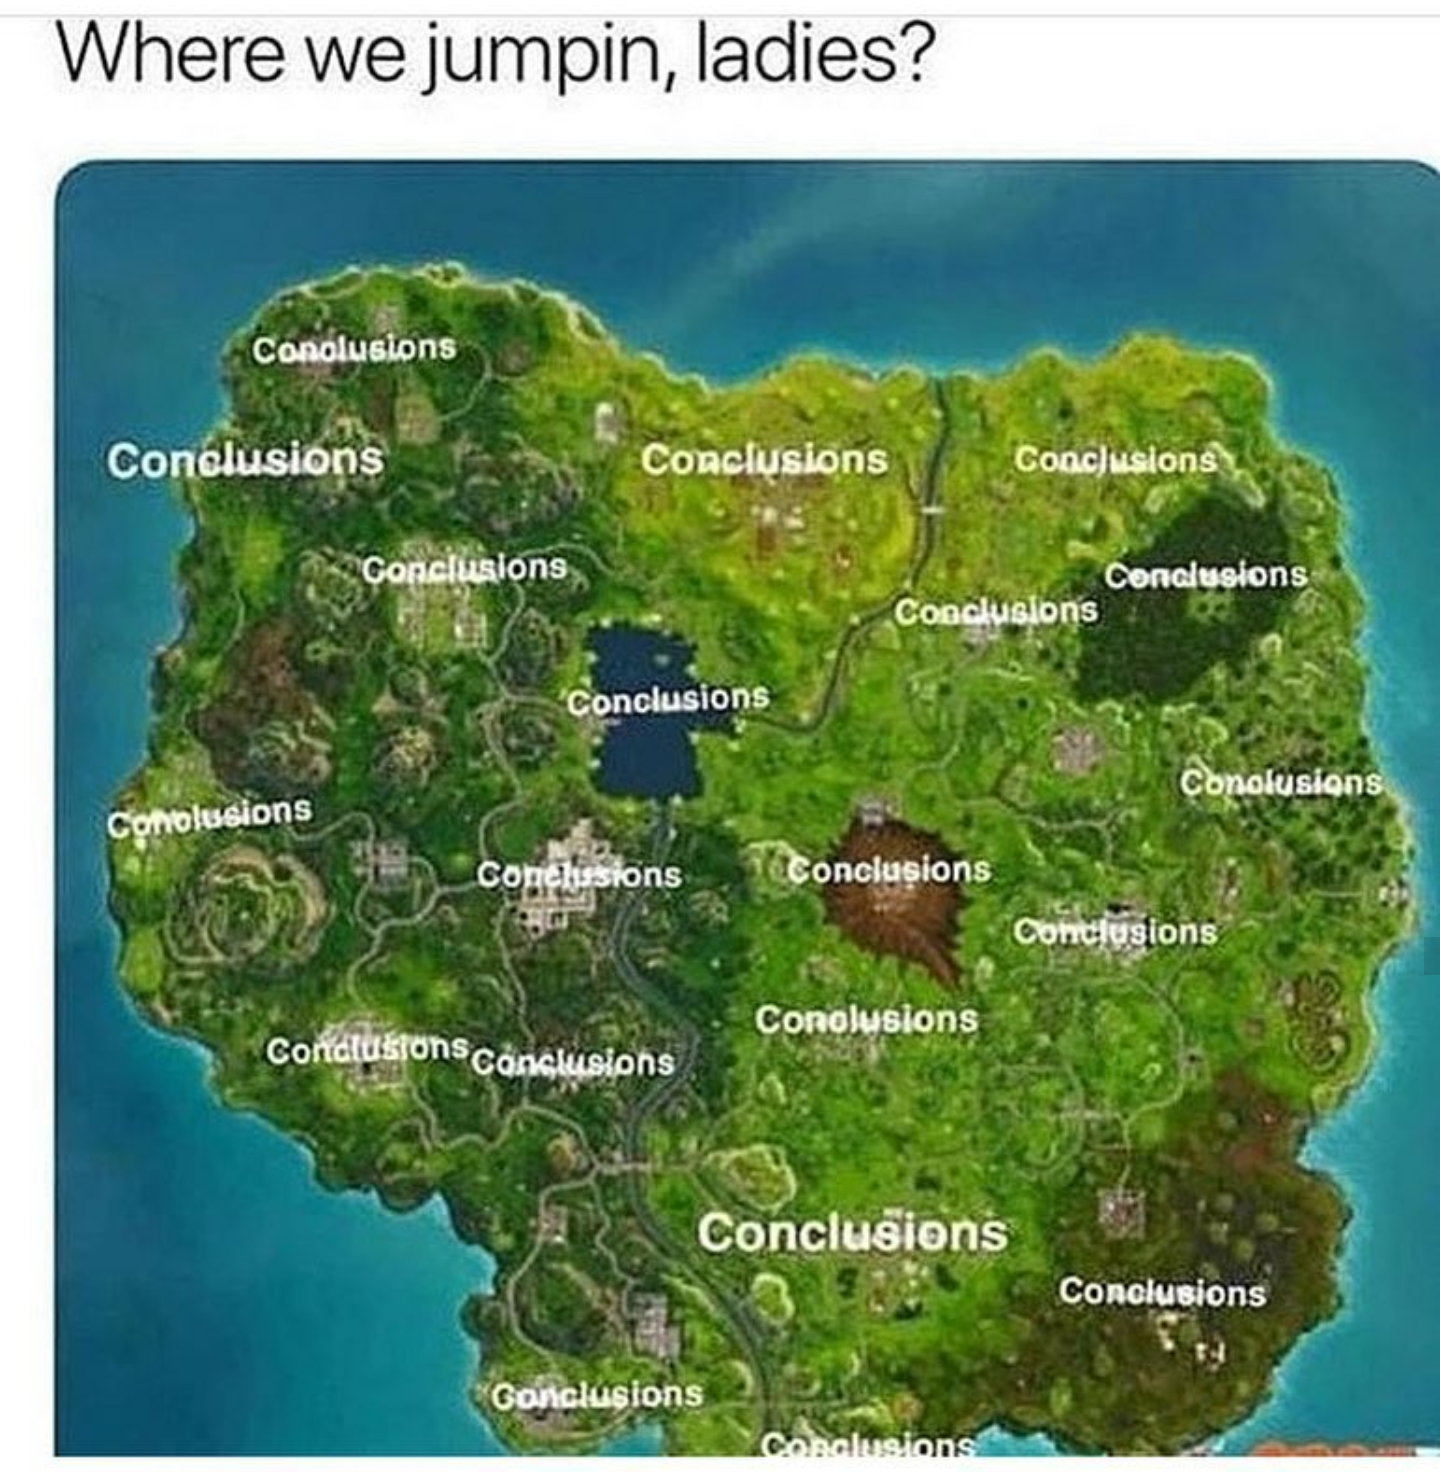 we jumping ladies conclusions - Where we jumpin, ladies? Canolusions Conclusions Conclusions Coacusions Conclusions Conclusions Conclusions Conclusions usions Conclusions Coholucions Conclusions Conclusions Conclusions Cortelostons conclusions Conclusions